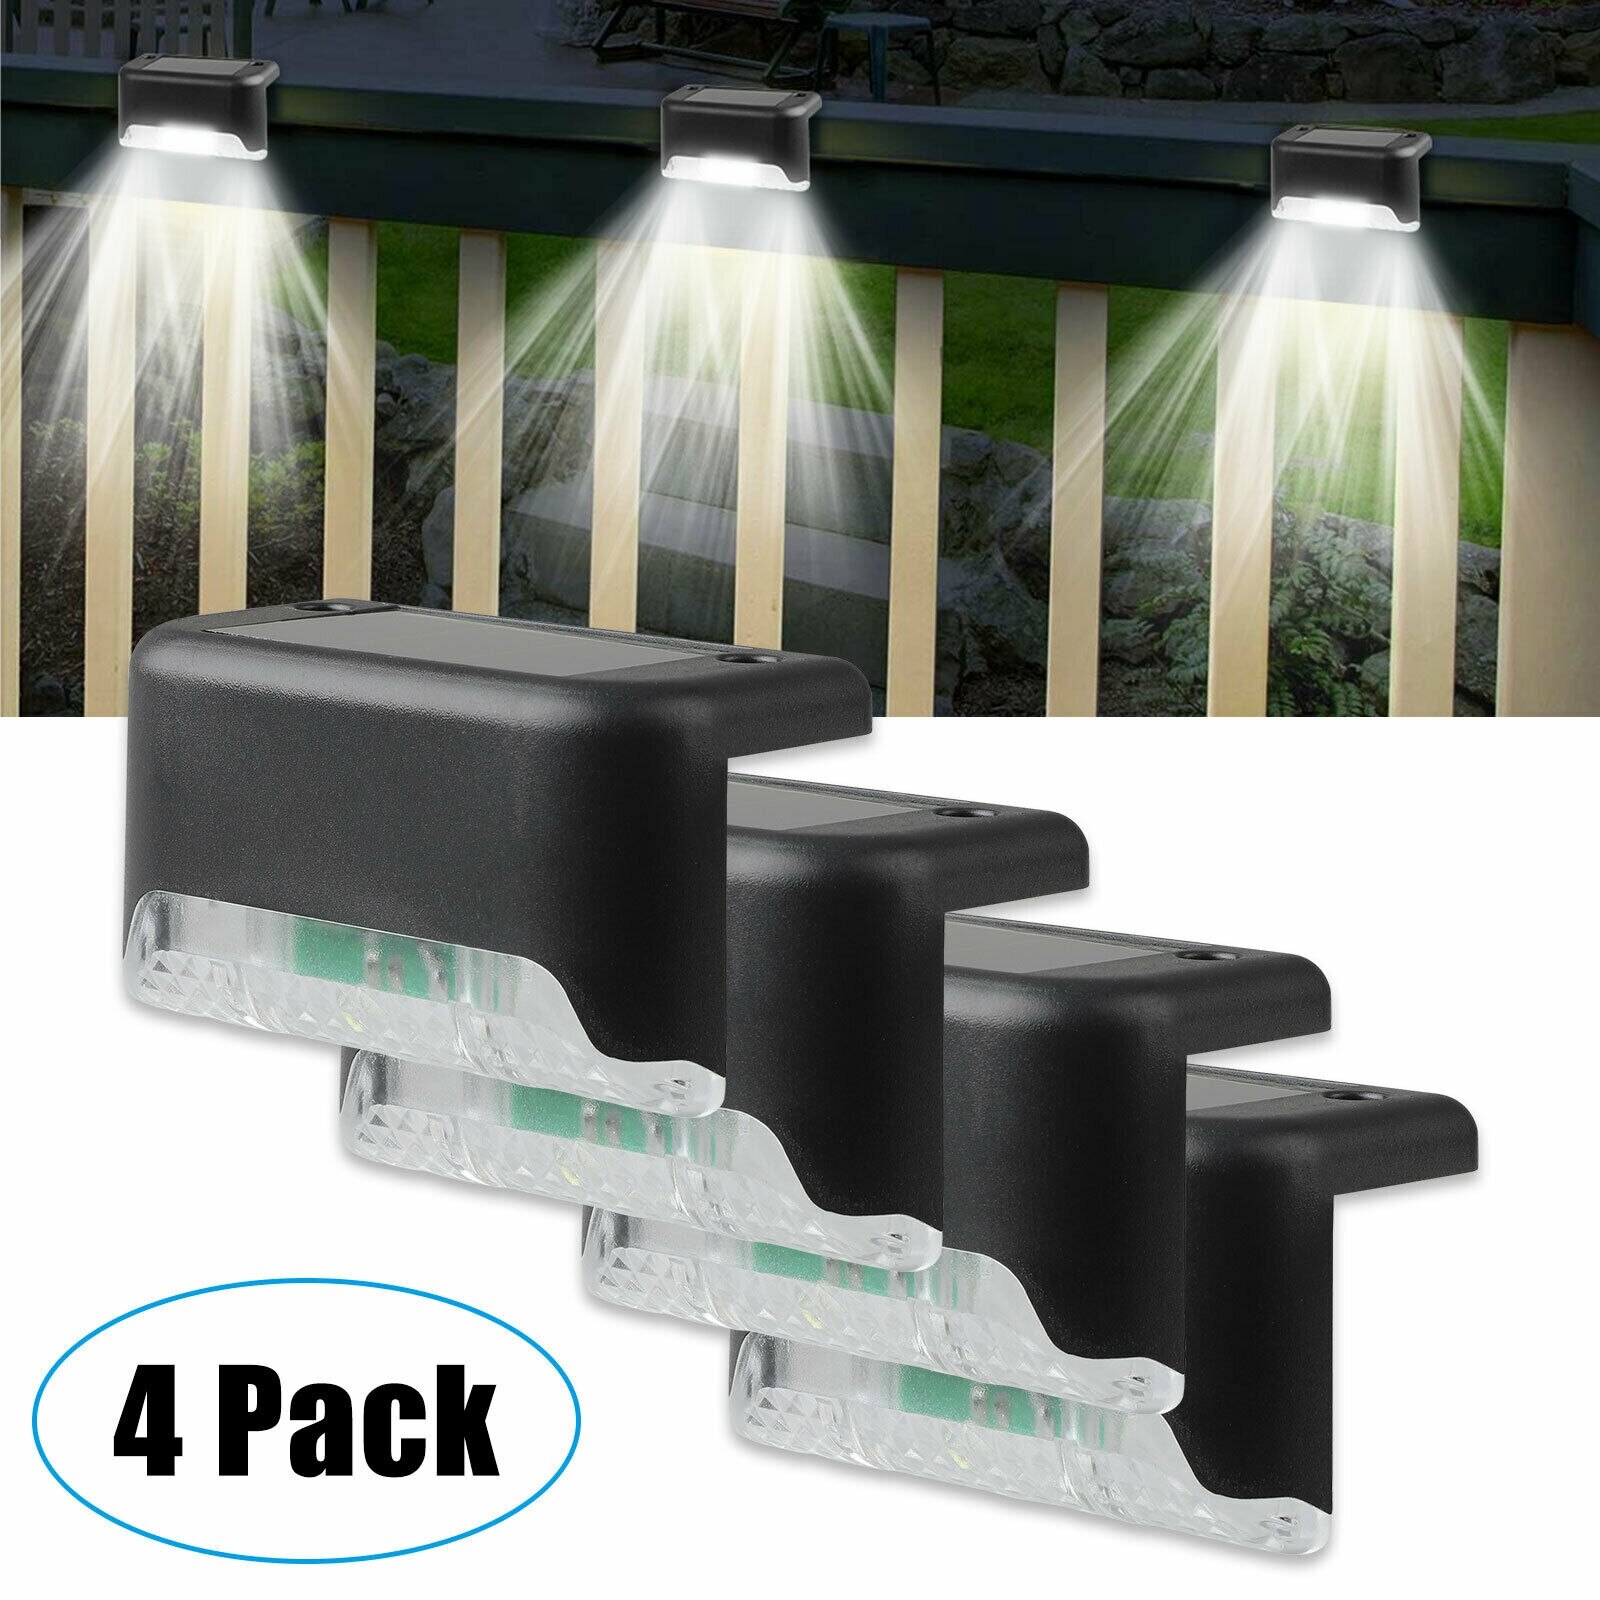 4 Pack 4 LED Solar Powered Lights Garden Wall Light for Garden Patio NORDSD Outdoor Lights Path Patio Traufen Fence Gutter